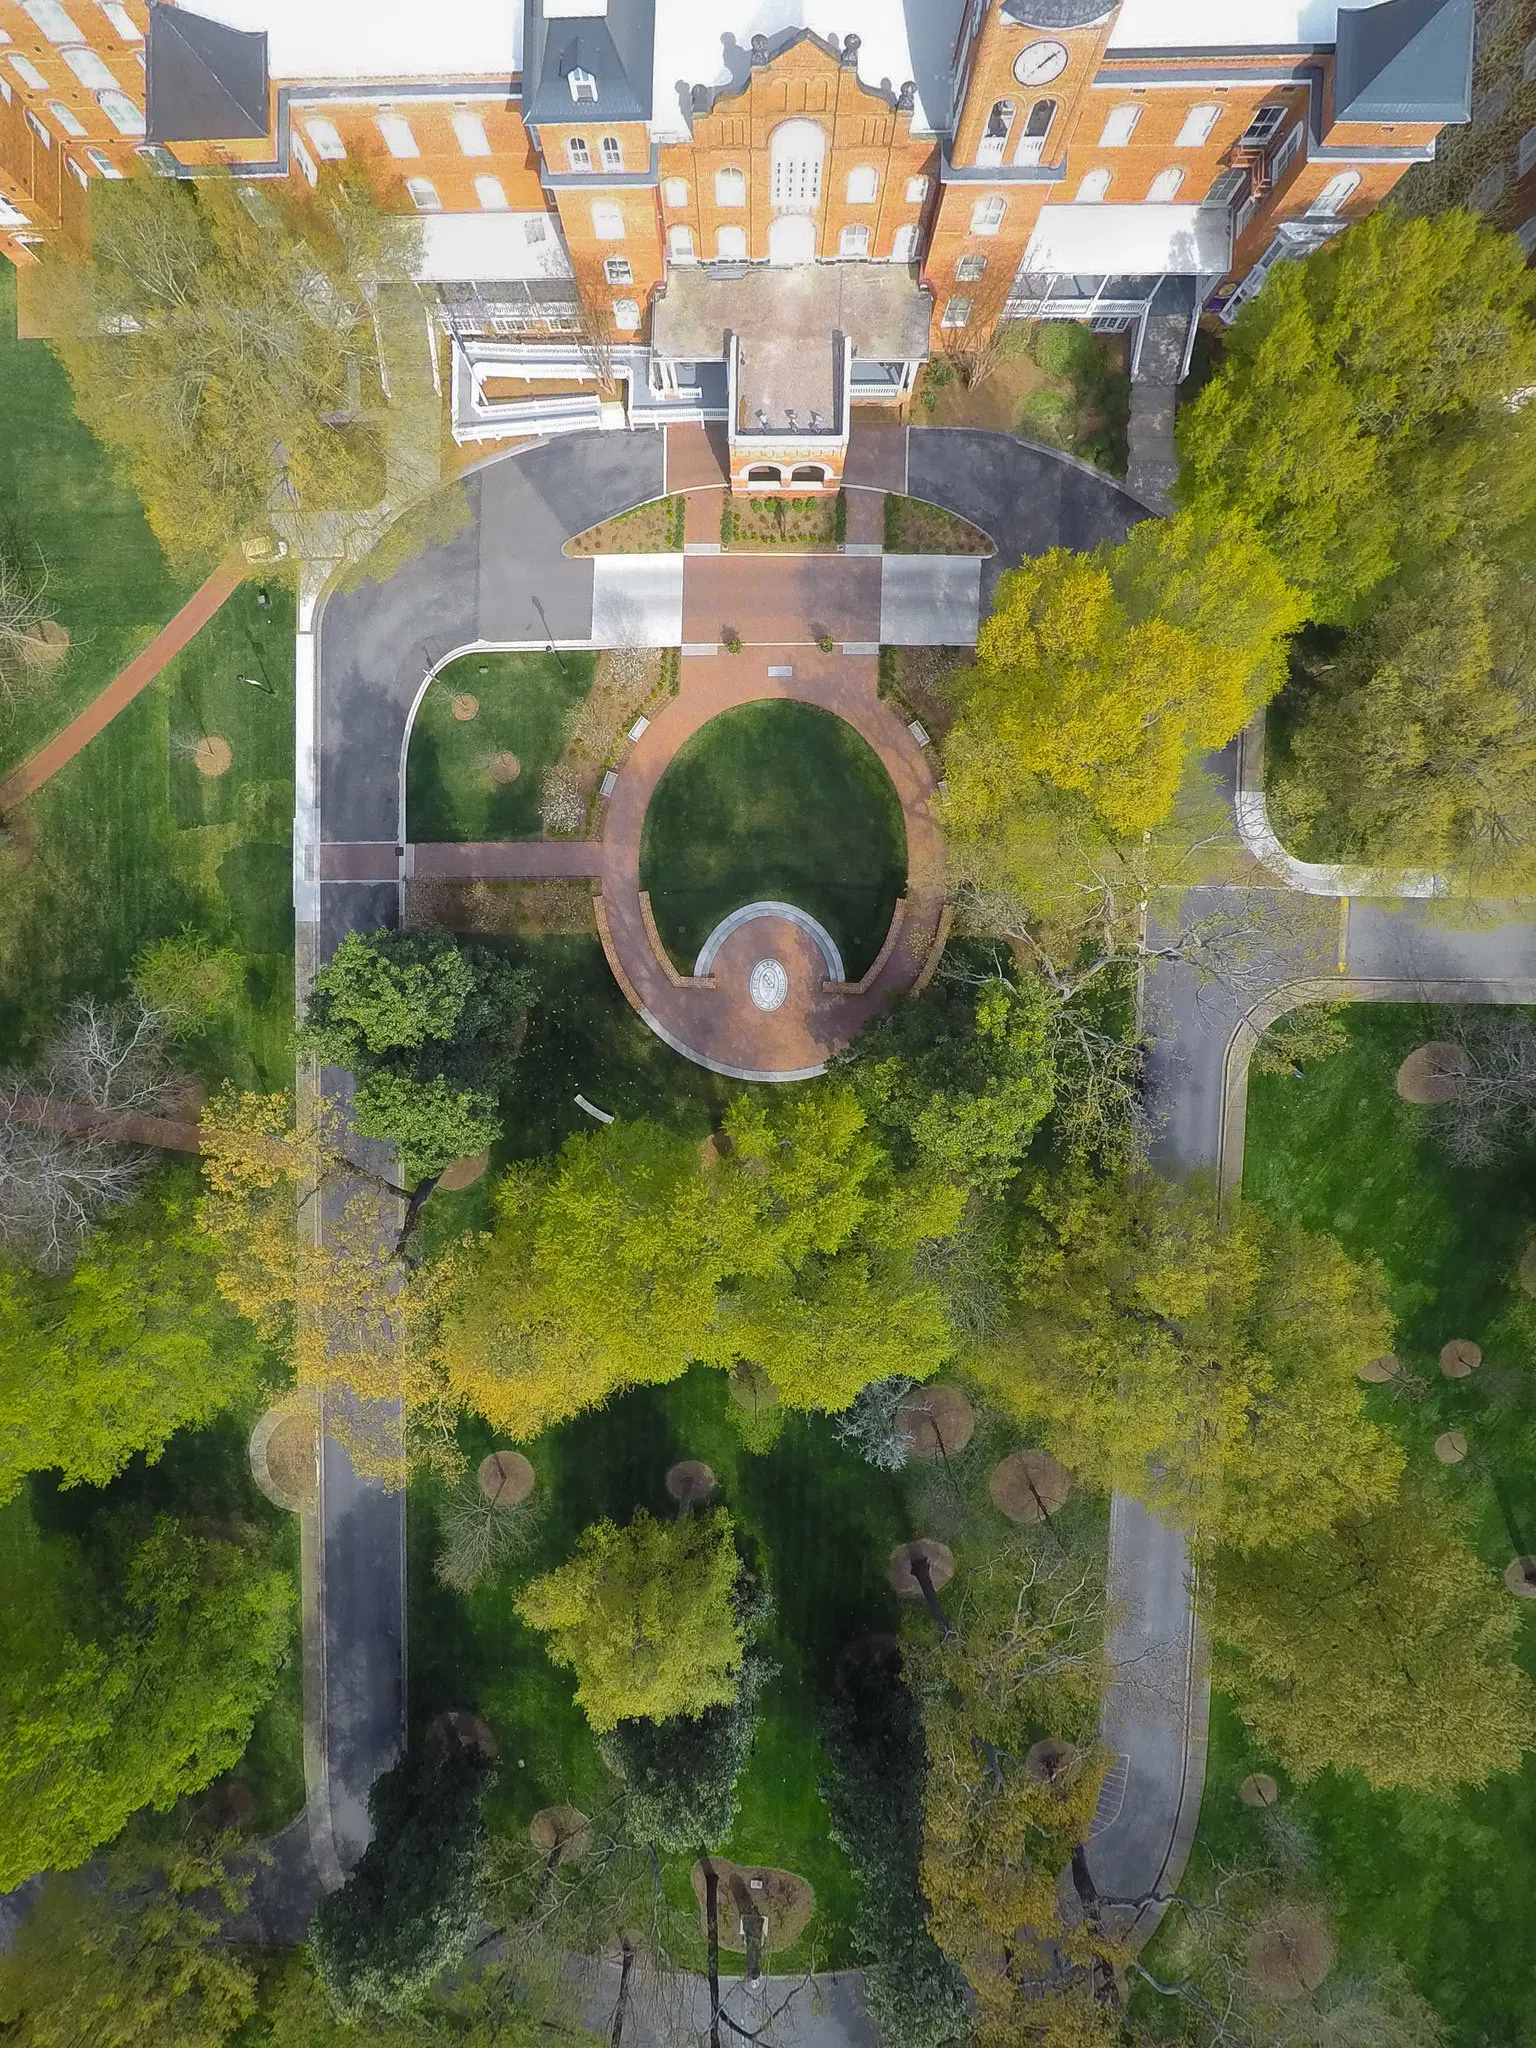 Large outdoor garden with grass and trees seen from above in image taken by drone. A large circular landing is ringed by a brick walkway. 